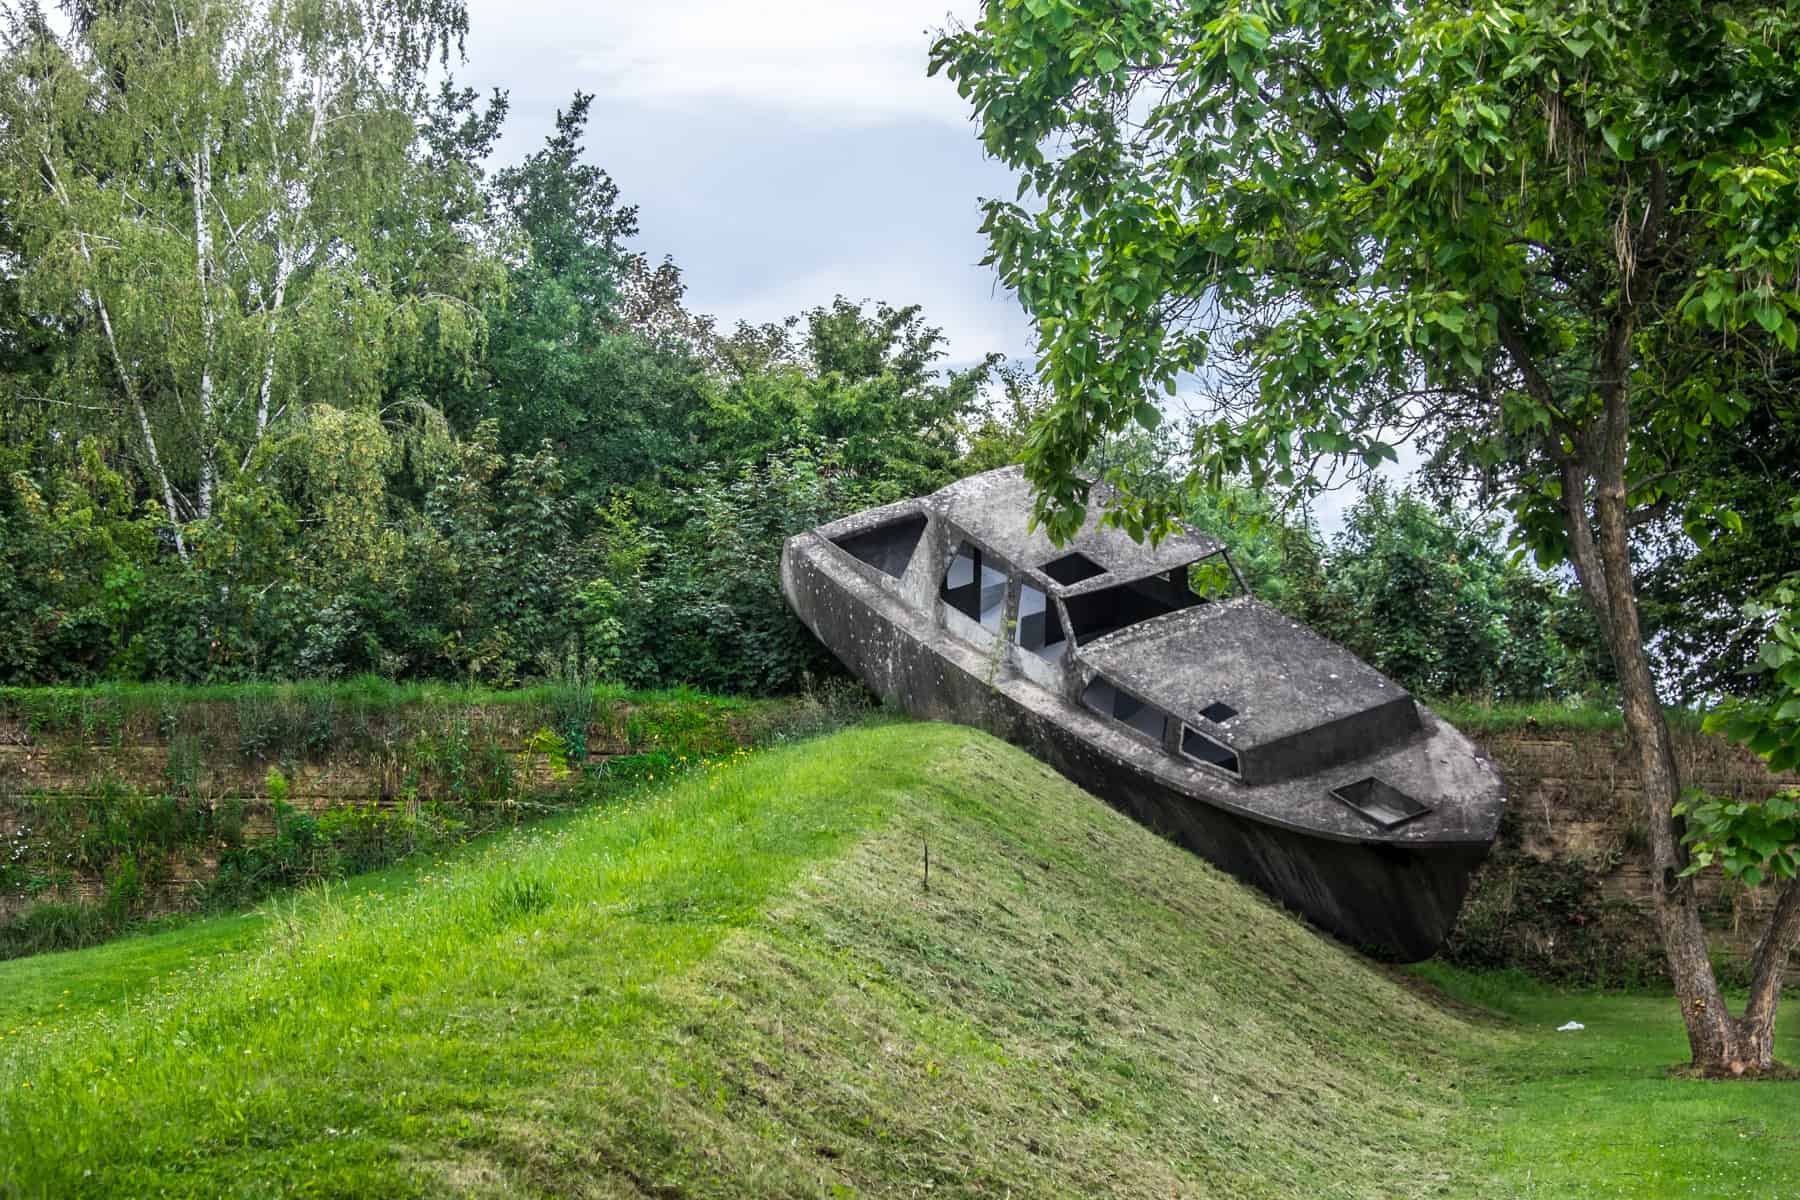 A concrete boat rests at an angle on sloping grass - one of the artworks at the ustrian Sculpture Park near Graz